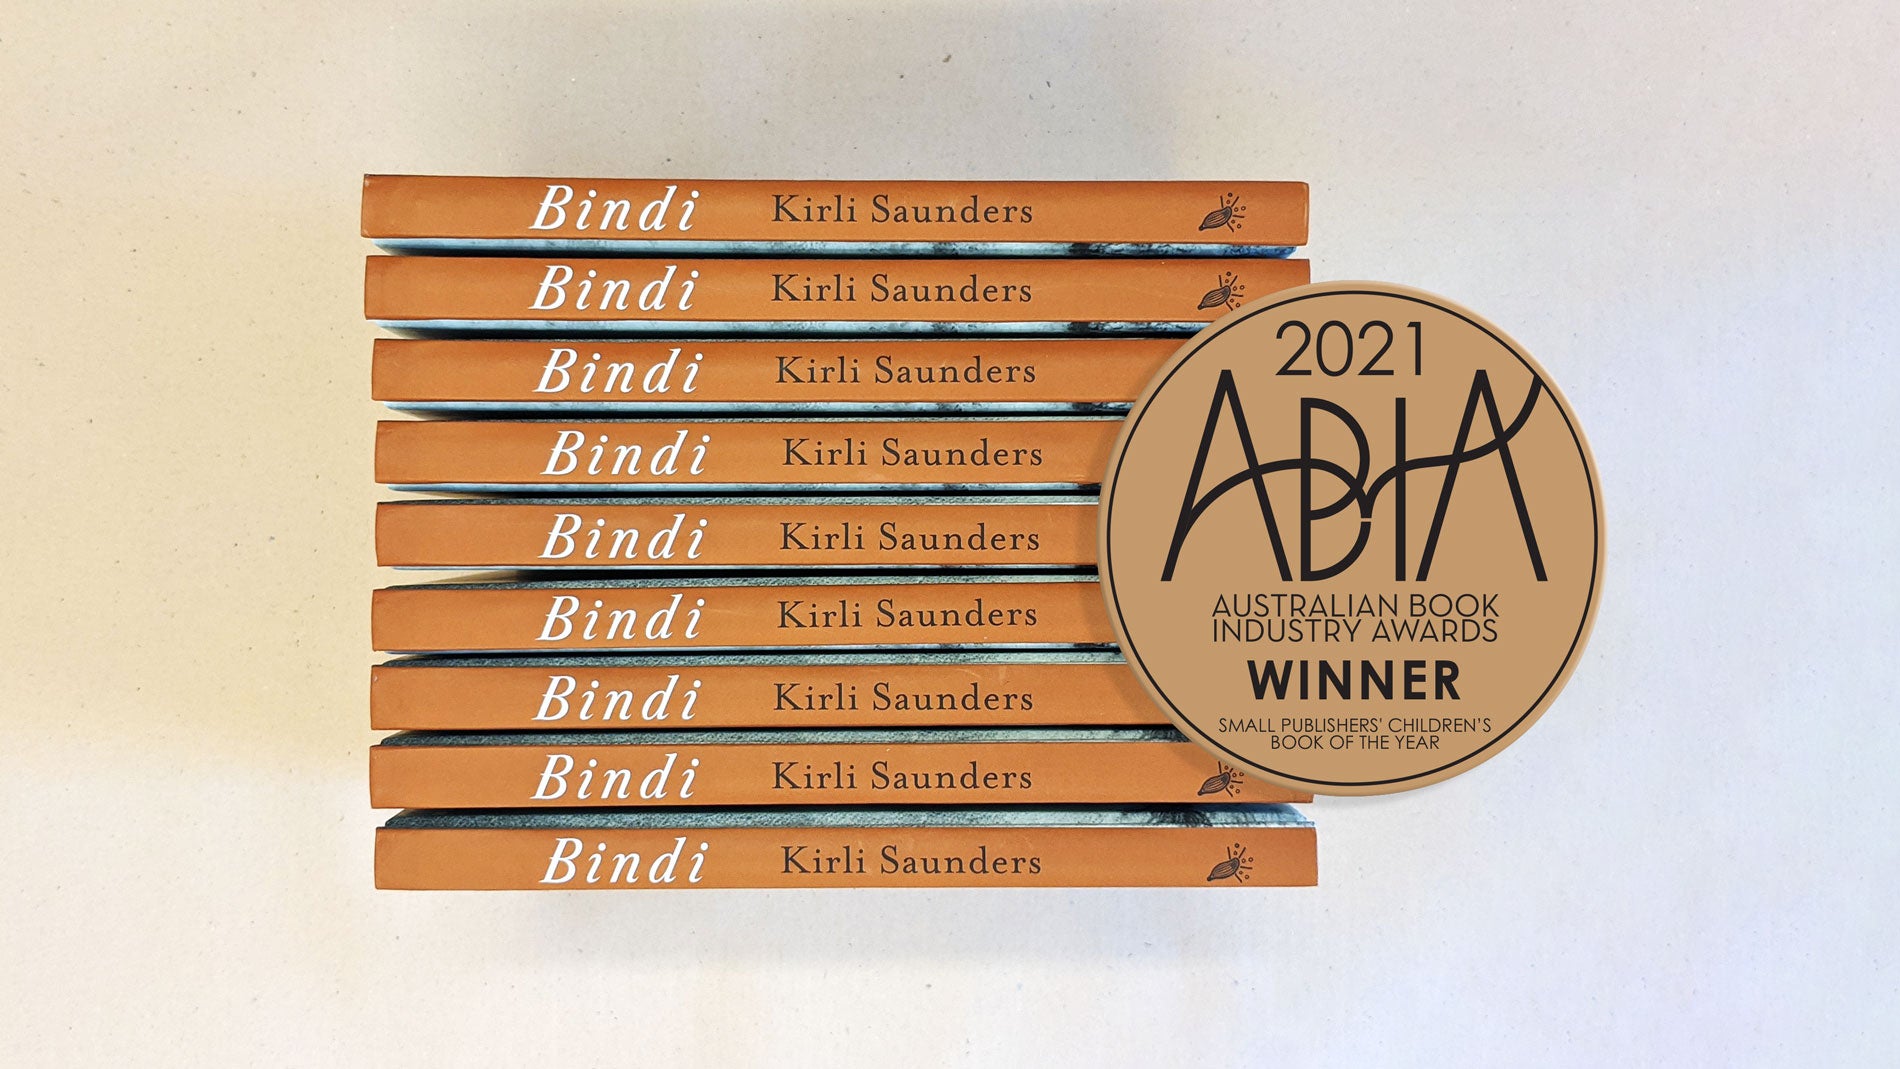 Magabala Books is thrilled to announced that Bindi by Kirli Saunders has won the 2021 Australian Book Industry Award for Small Publishers’ Children’s Book of the Year. 